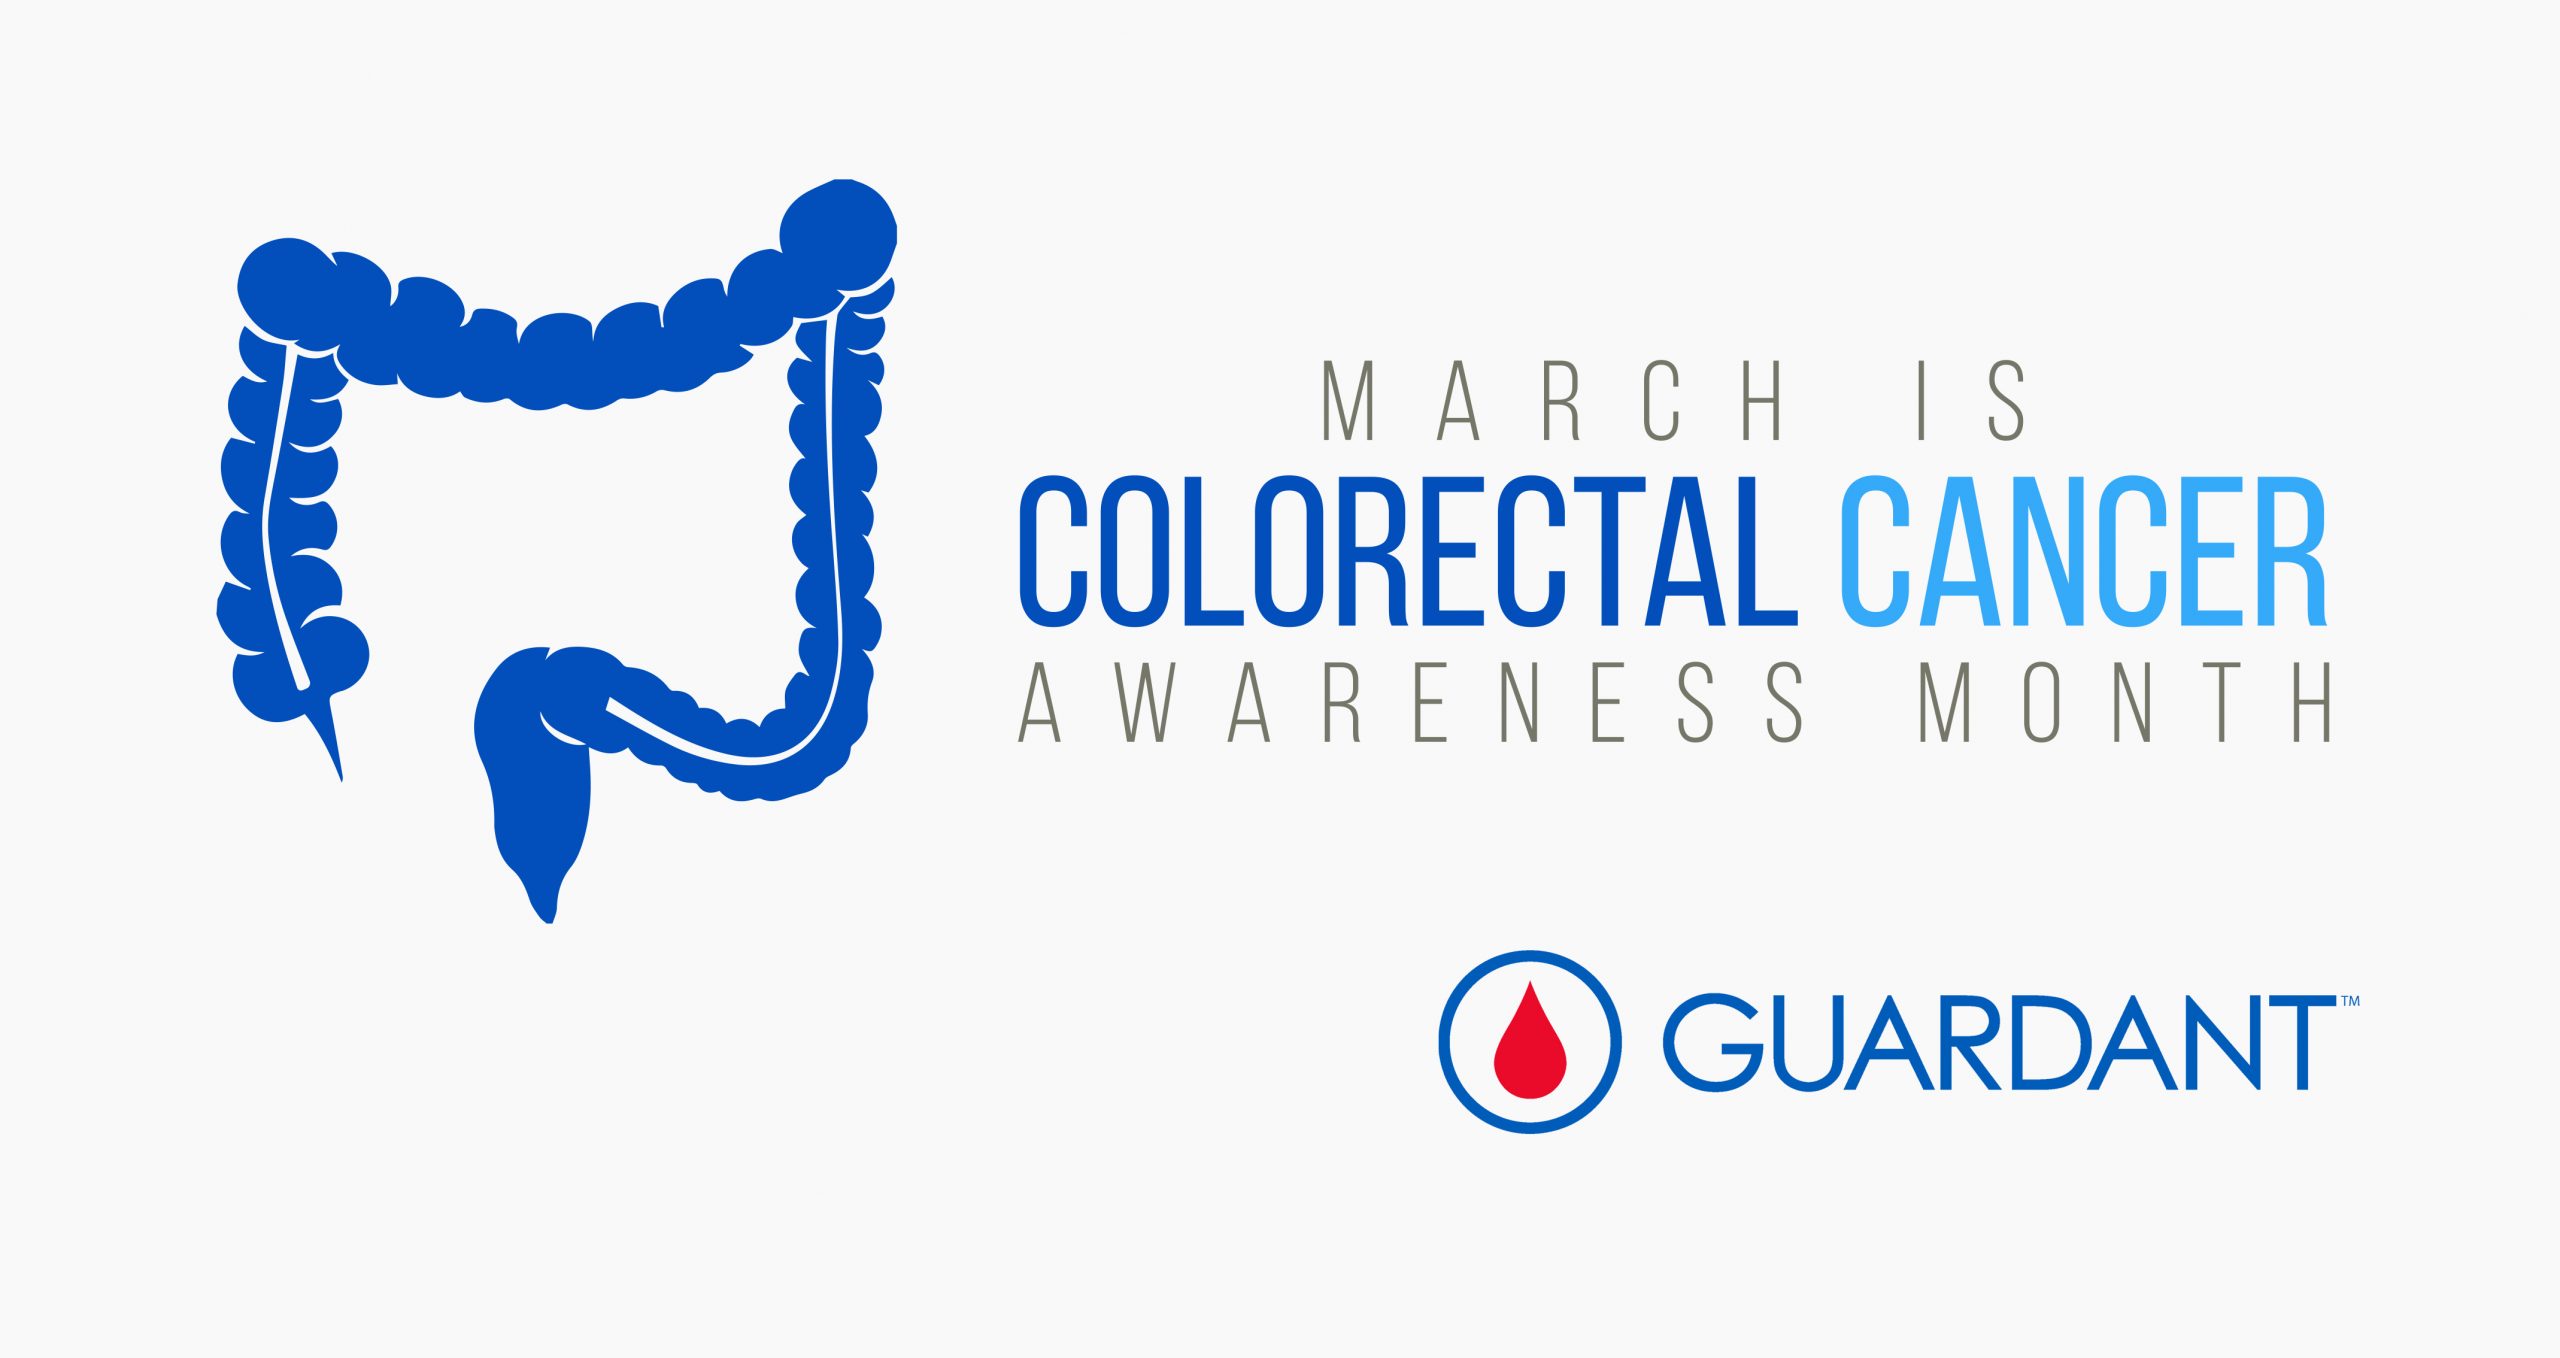 In observance of colorectal cancer awareness this month